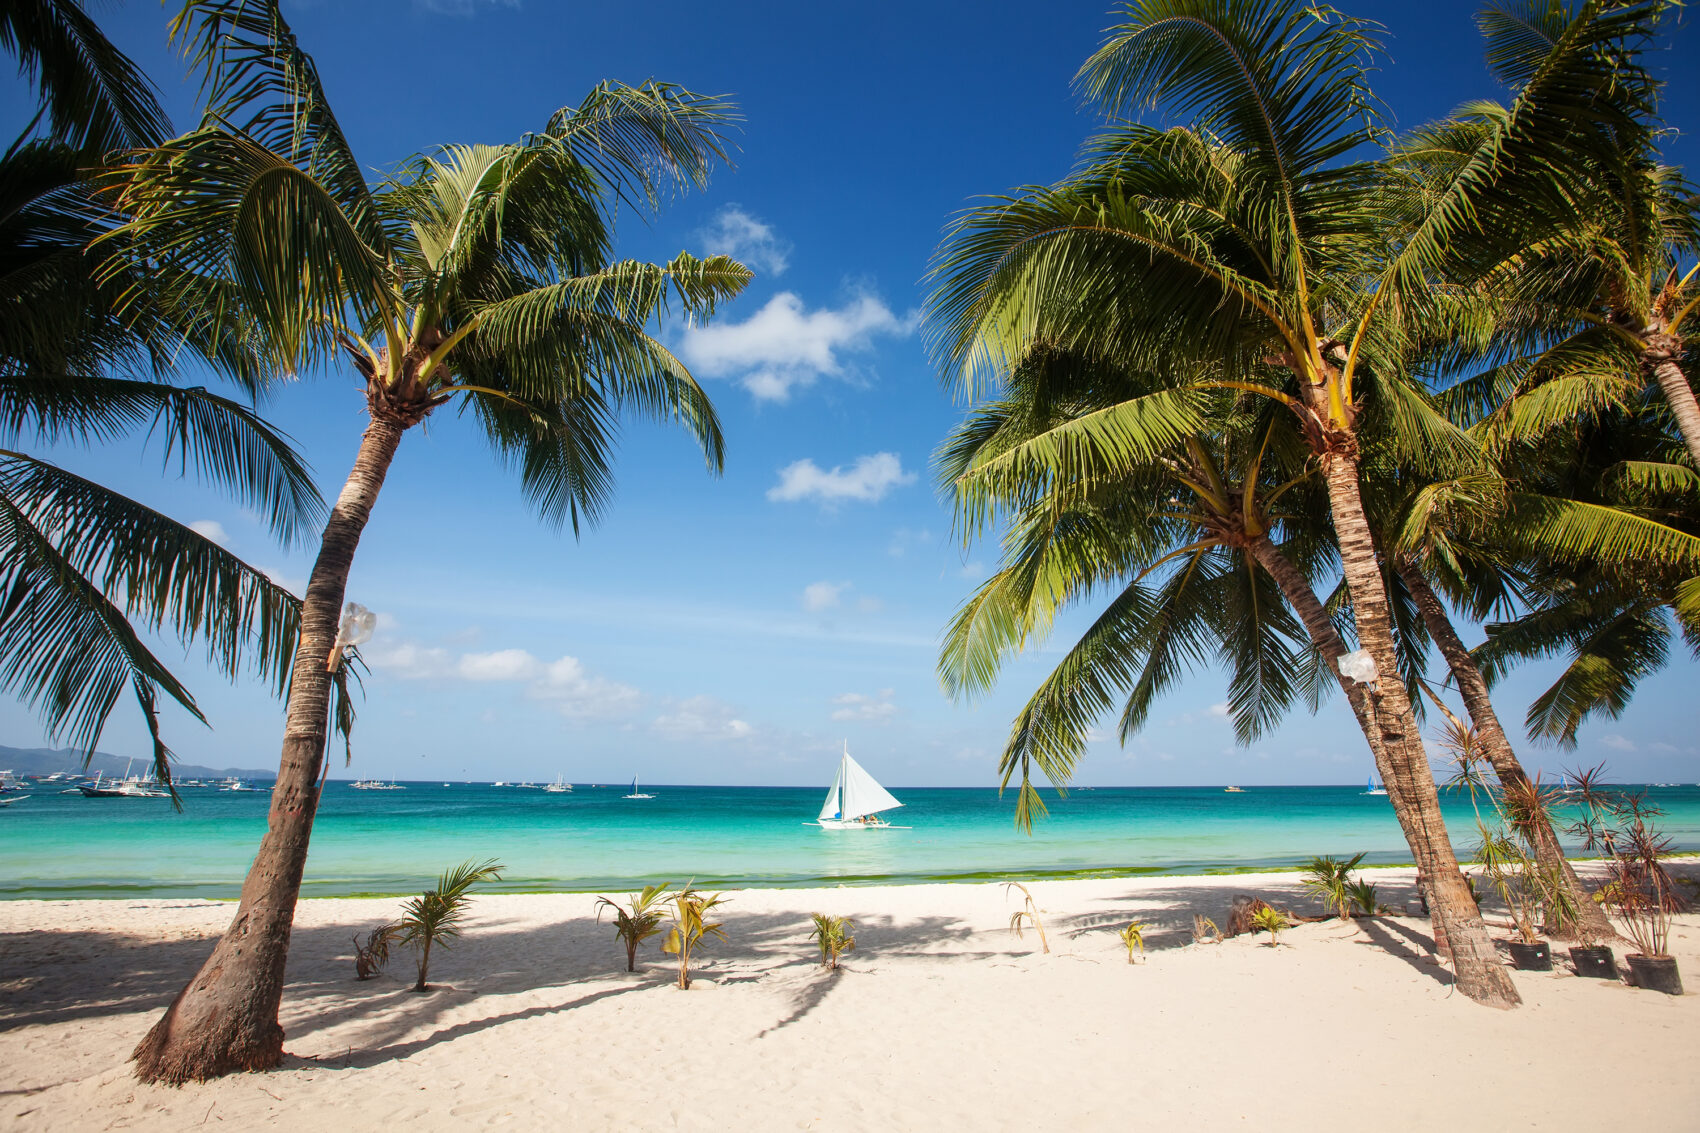 Tropical beach with beautiful palms and white sand